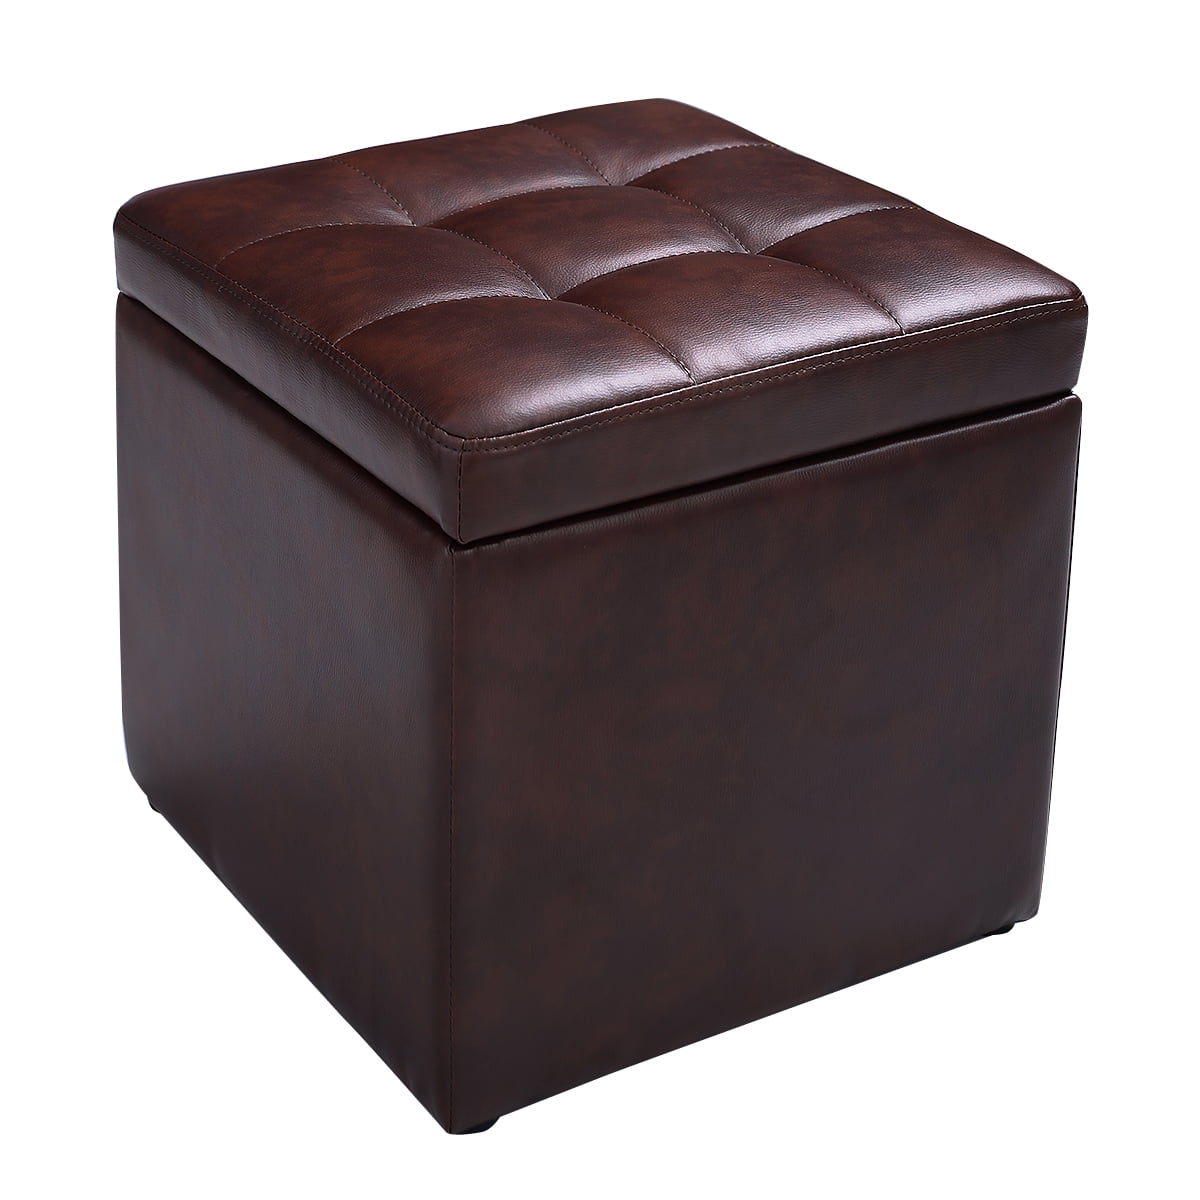 Queiting Folding Storage Ottoman Storage Box Faux Leather Pouffe Seat Foot Stool Cube Single Seat Bench with Removable Lid